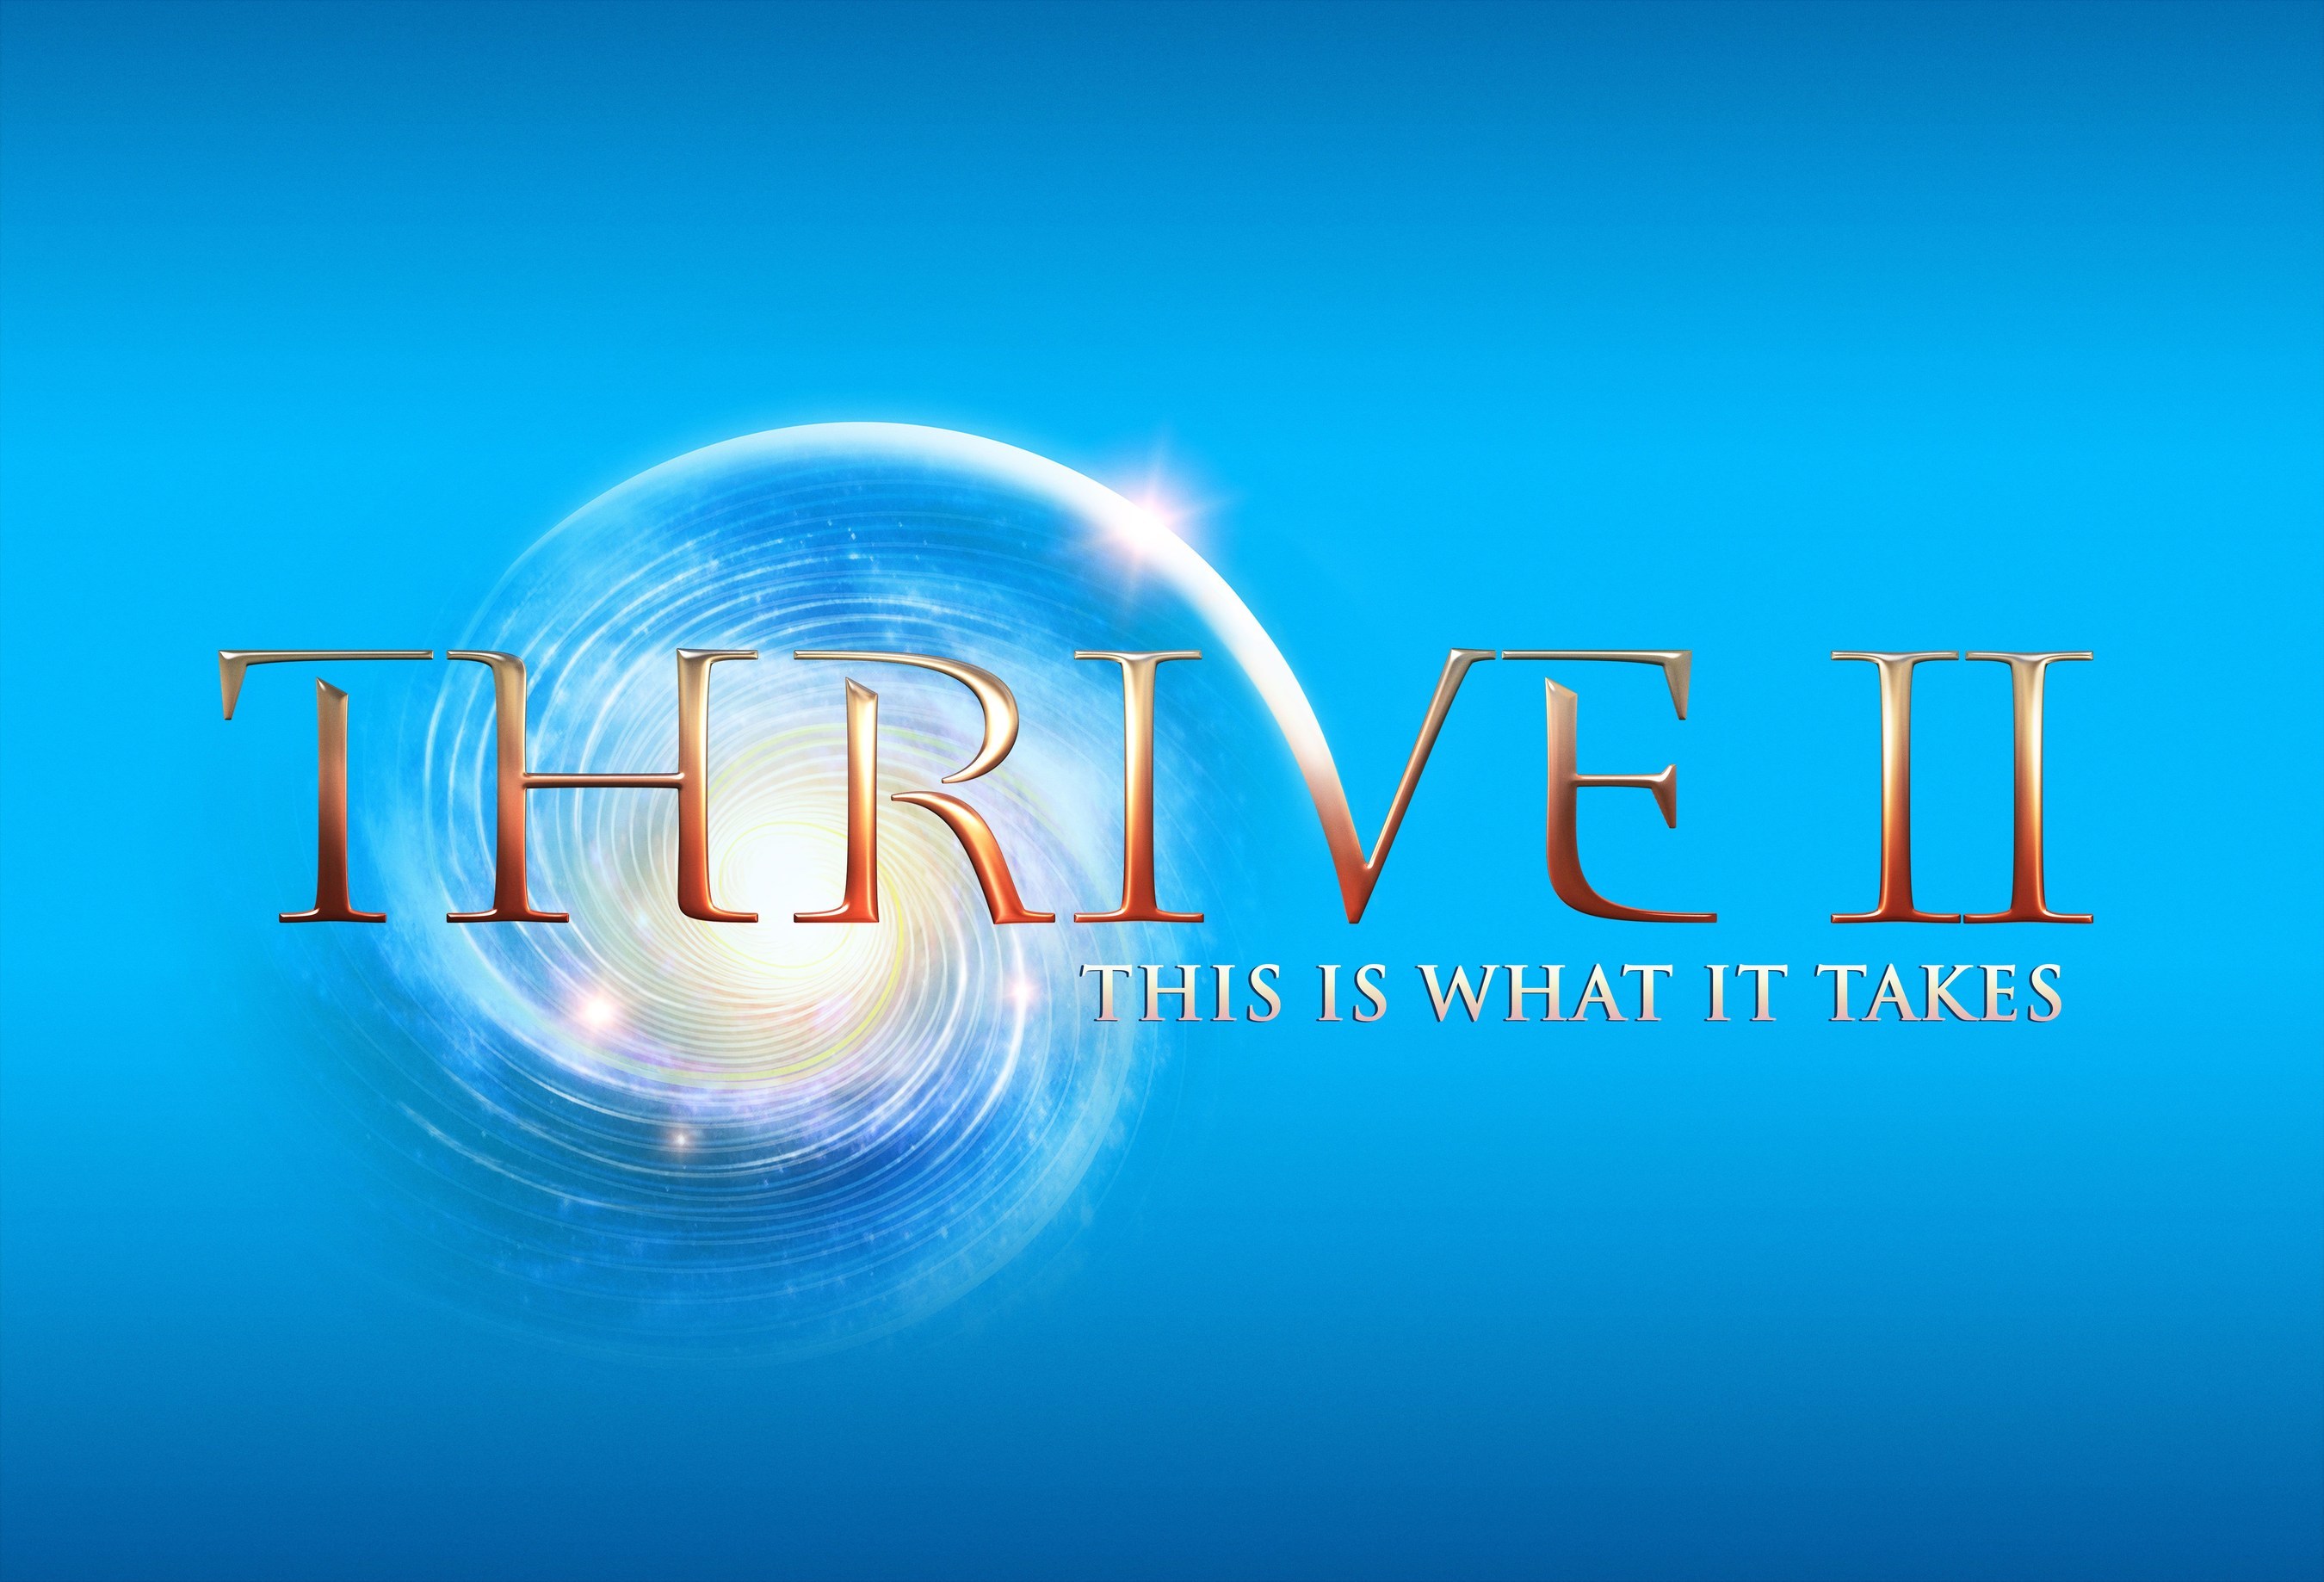 Thrive Ii This Is What It Takes Releases Trailer August 8th In 15